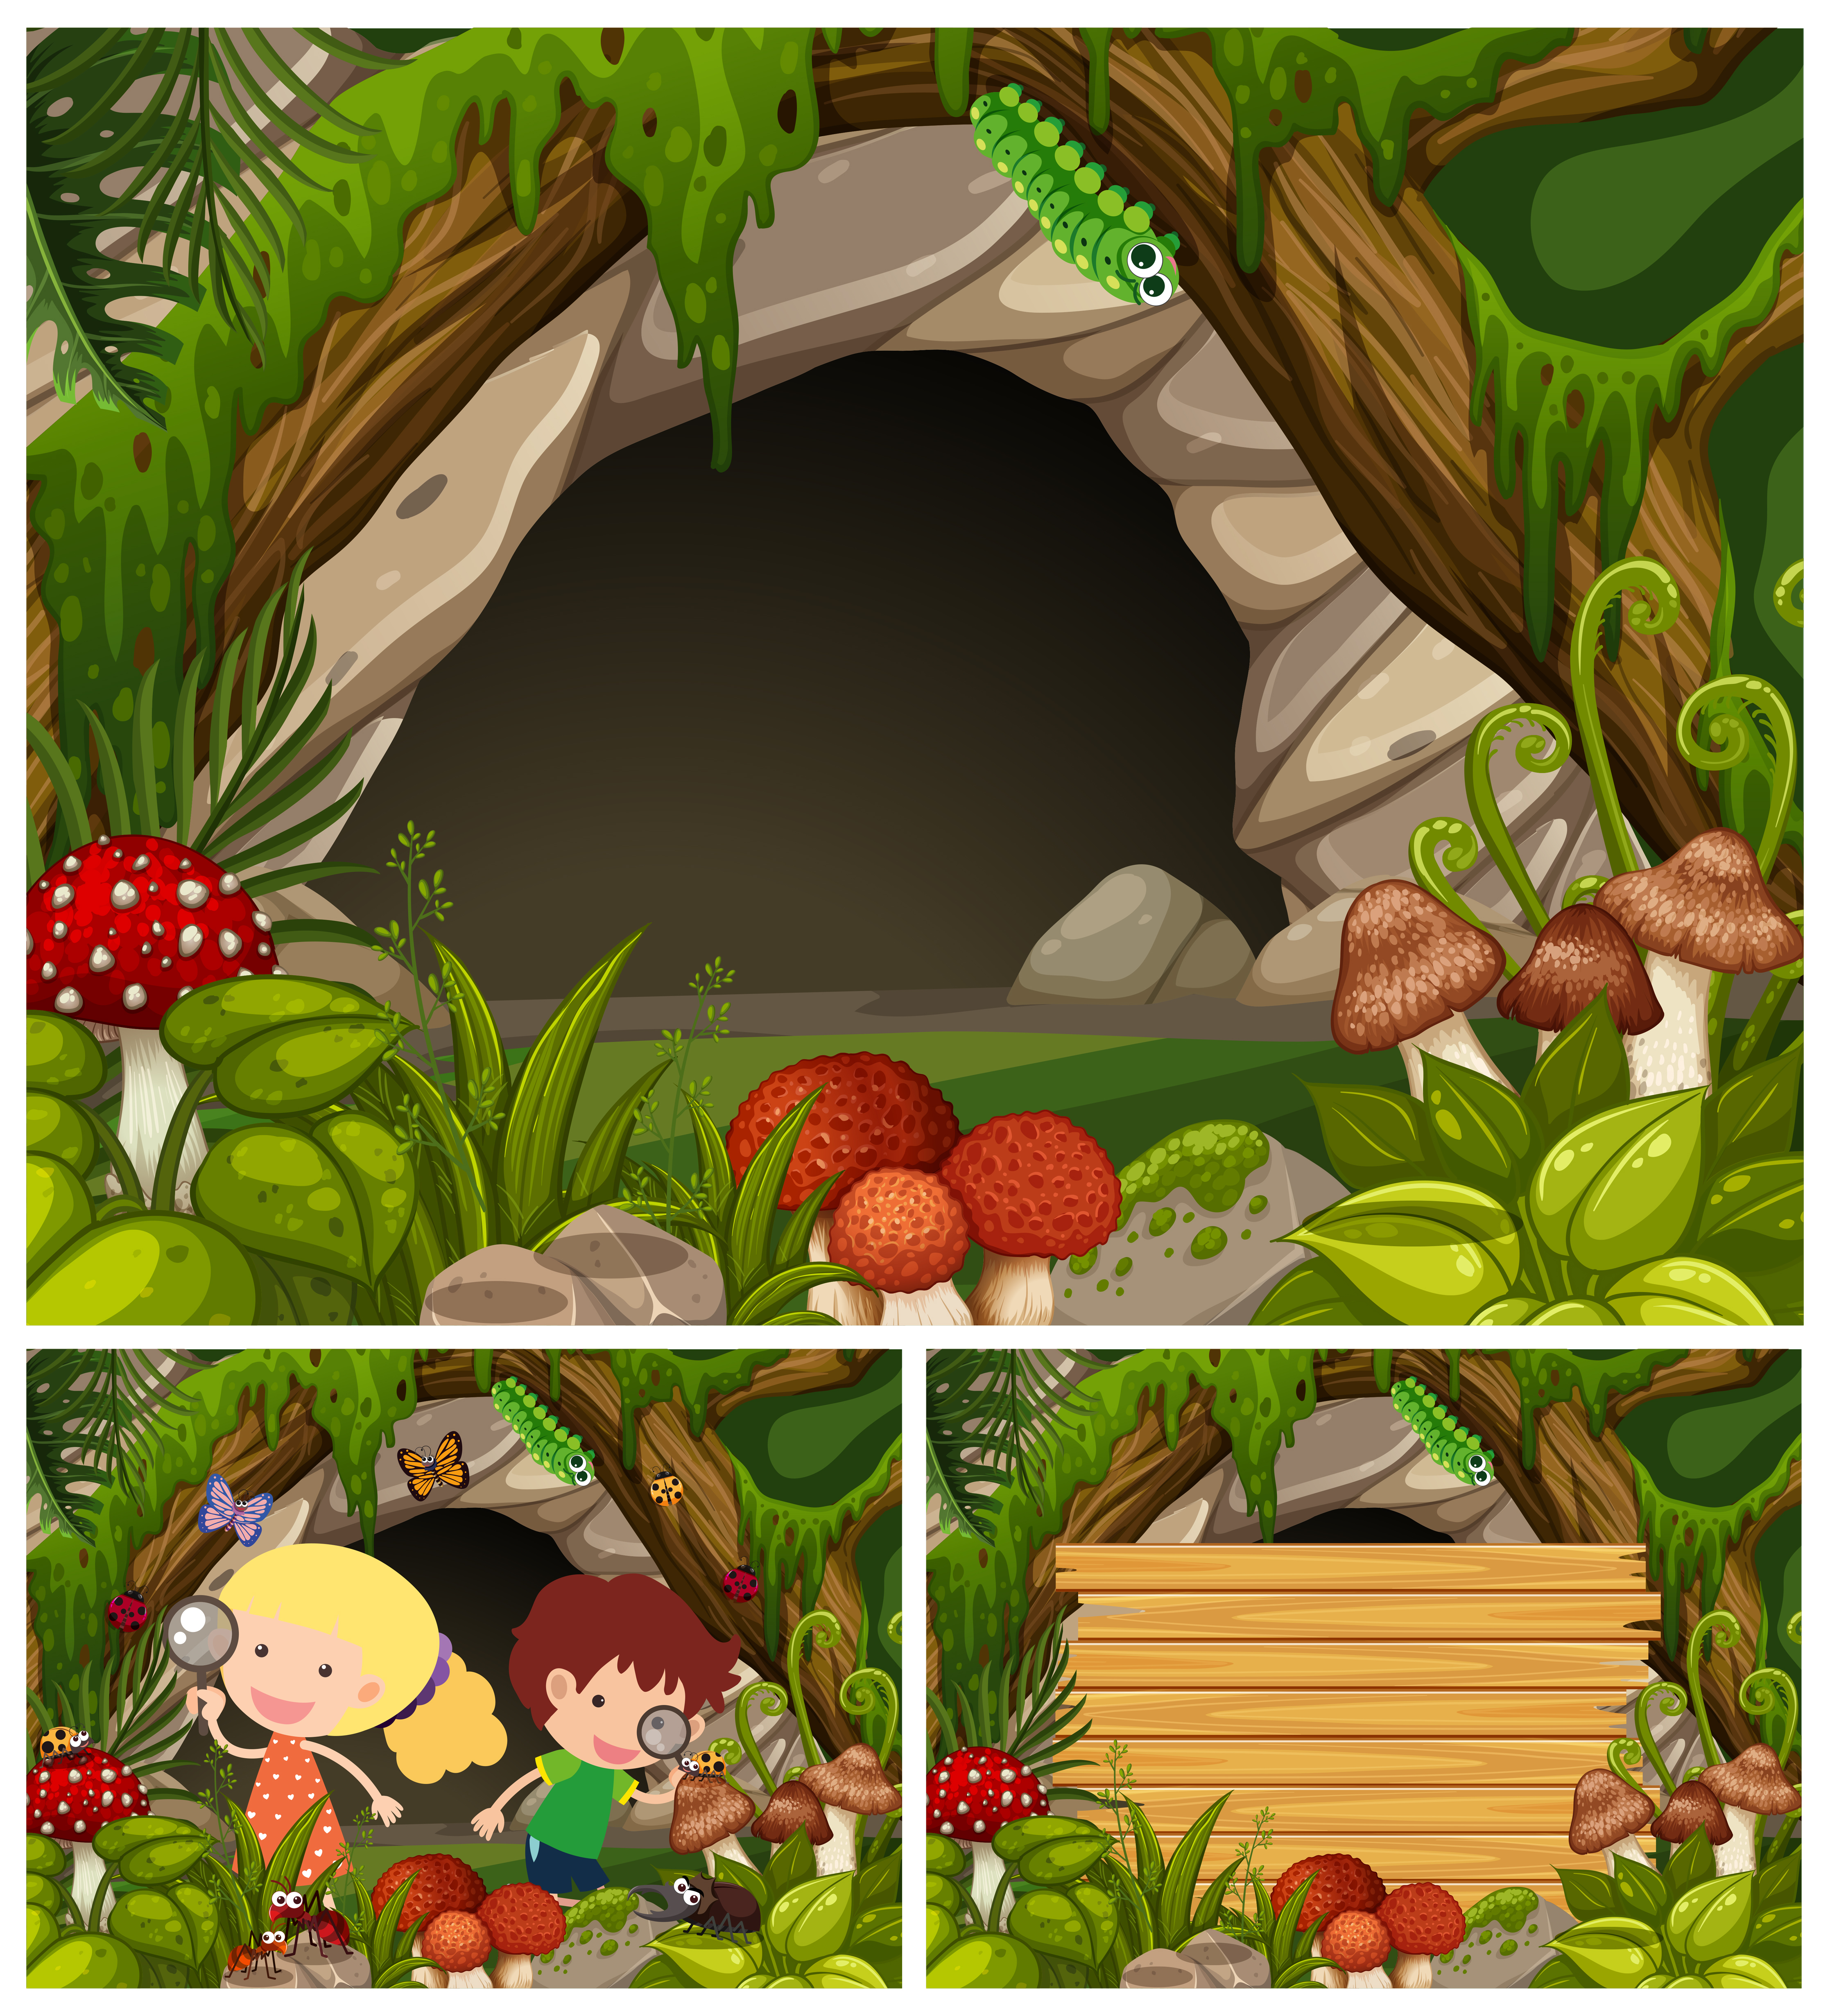 Kids Looking At Insects By The Cave Download Free Vectors